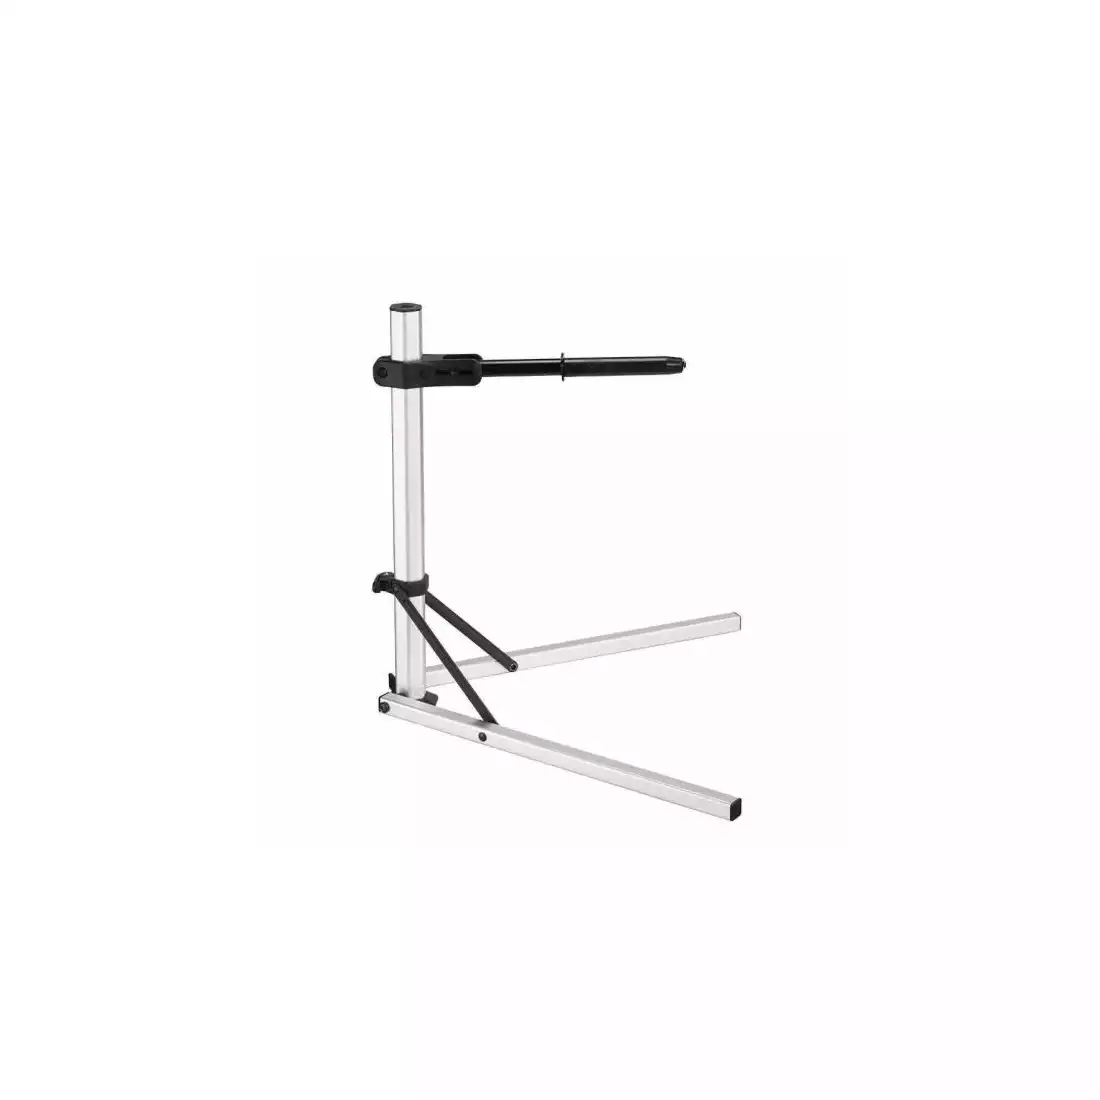 GRANITE HEX bicycle stand, silver